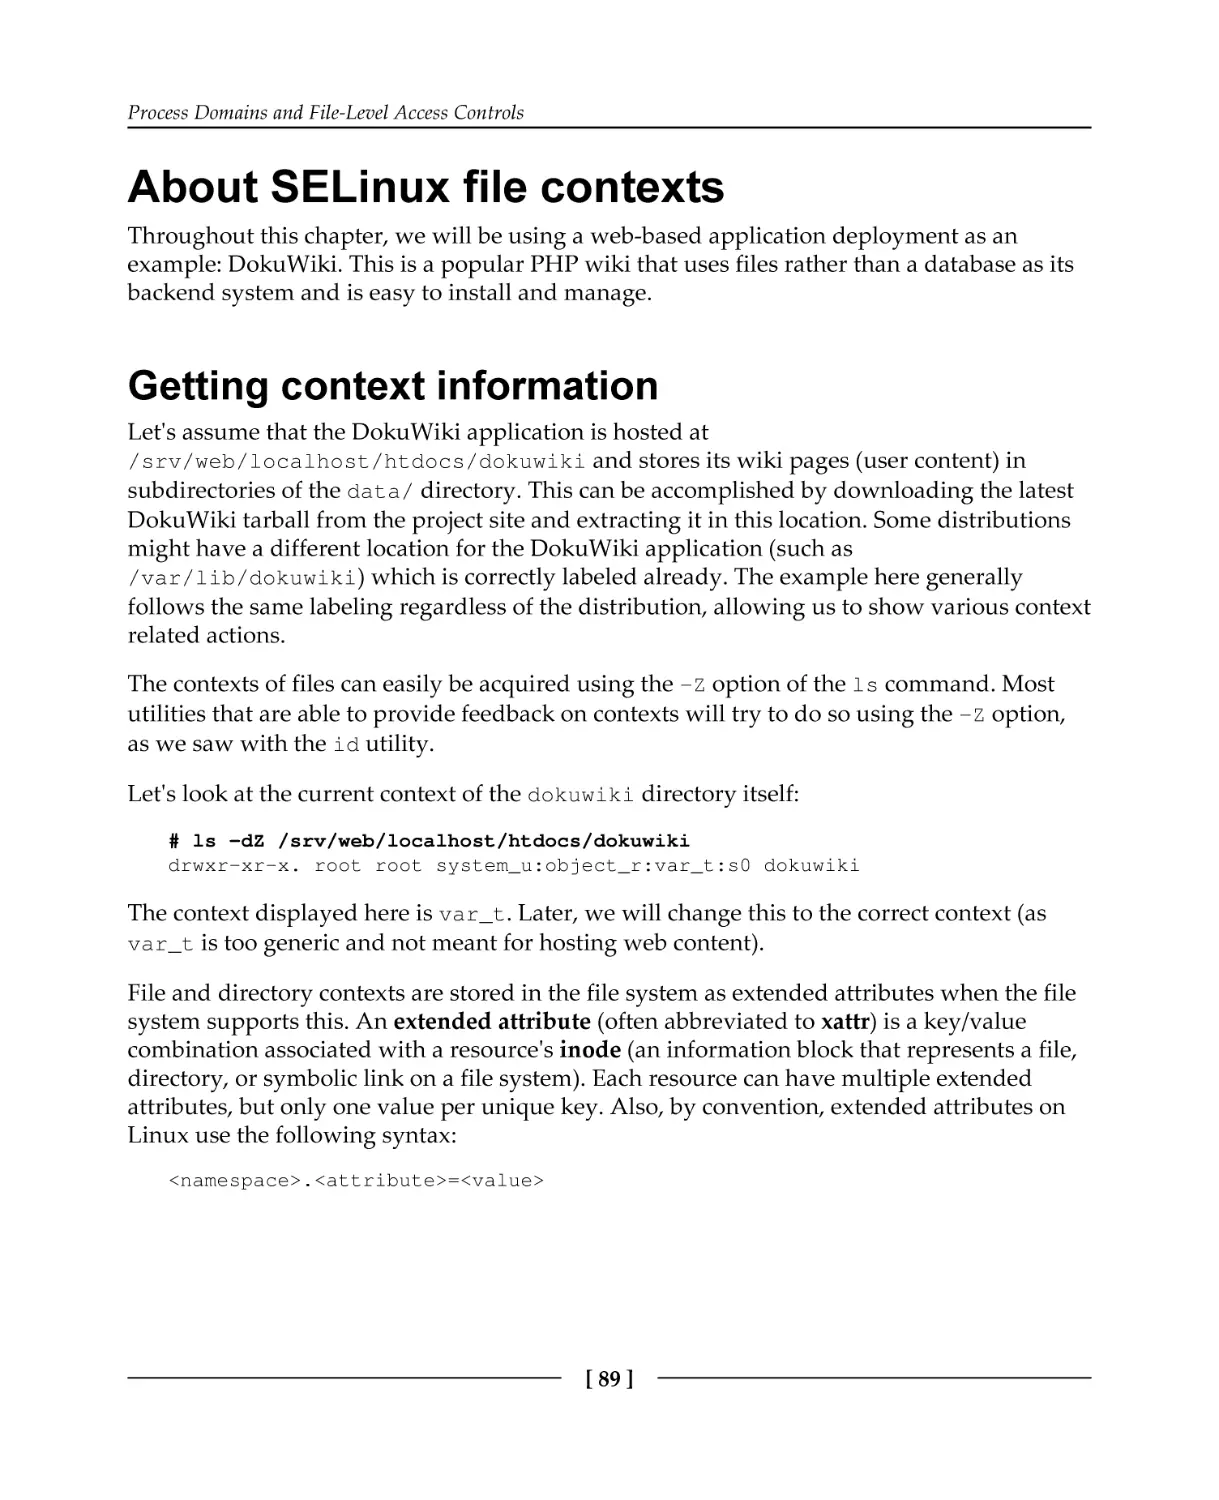 About SELinux file contexts
Getting context information